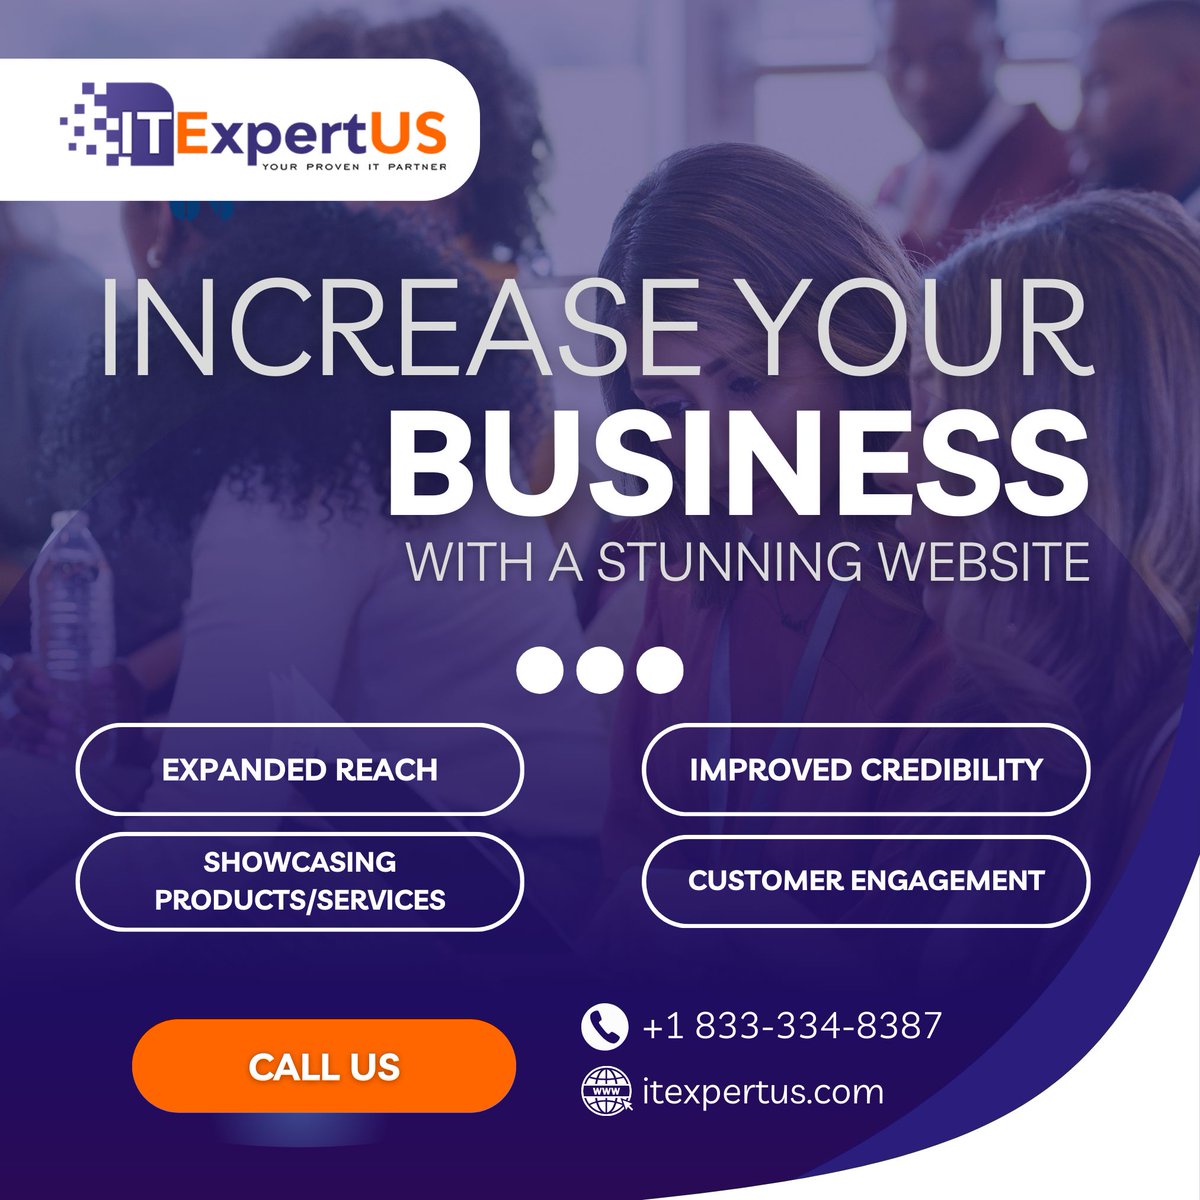 Ready to take your sales to new heights? Let's create your website today! 💻 

Call @ +1 833-334-8387 

#BoostYourBusiness #WebsiteSuccess #DigitalTransformation #Website #WebsiteDesign #WebDesign #Growth #Success #IT #USA